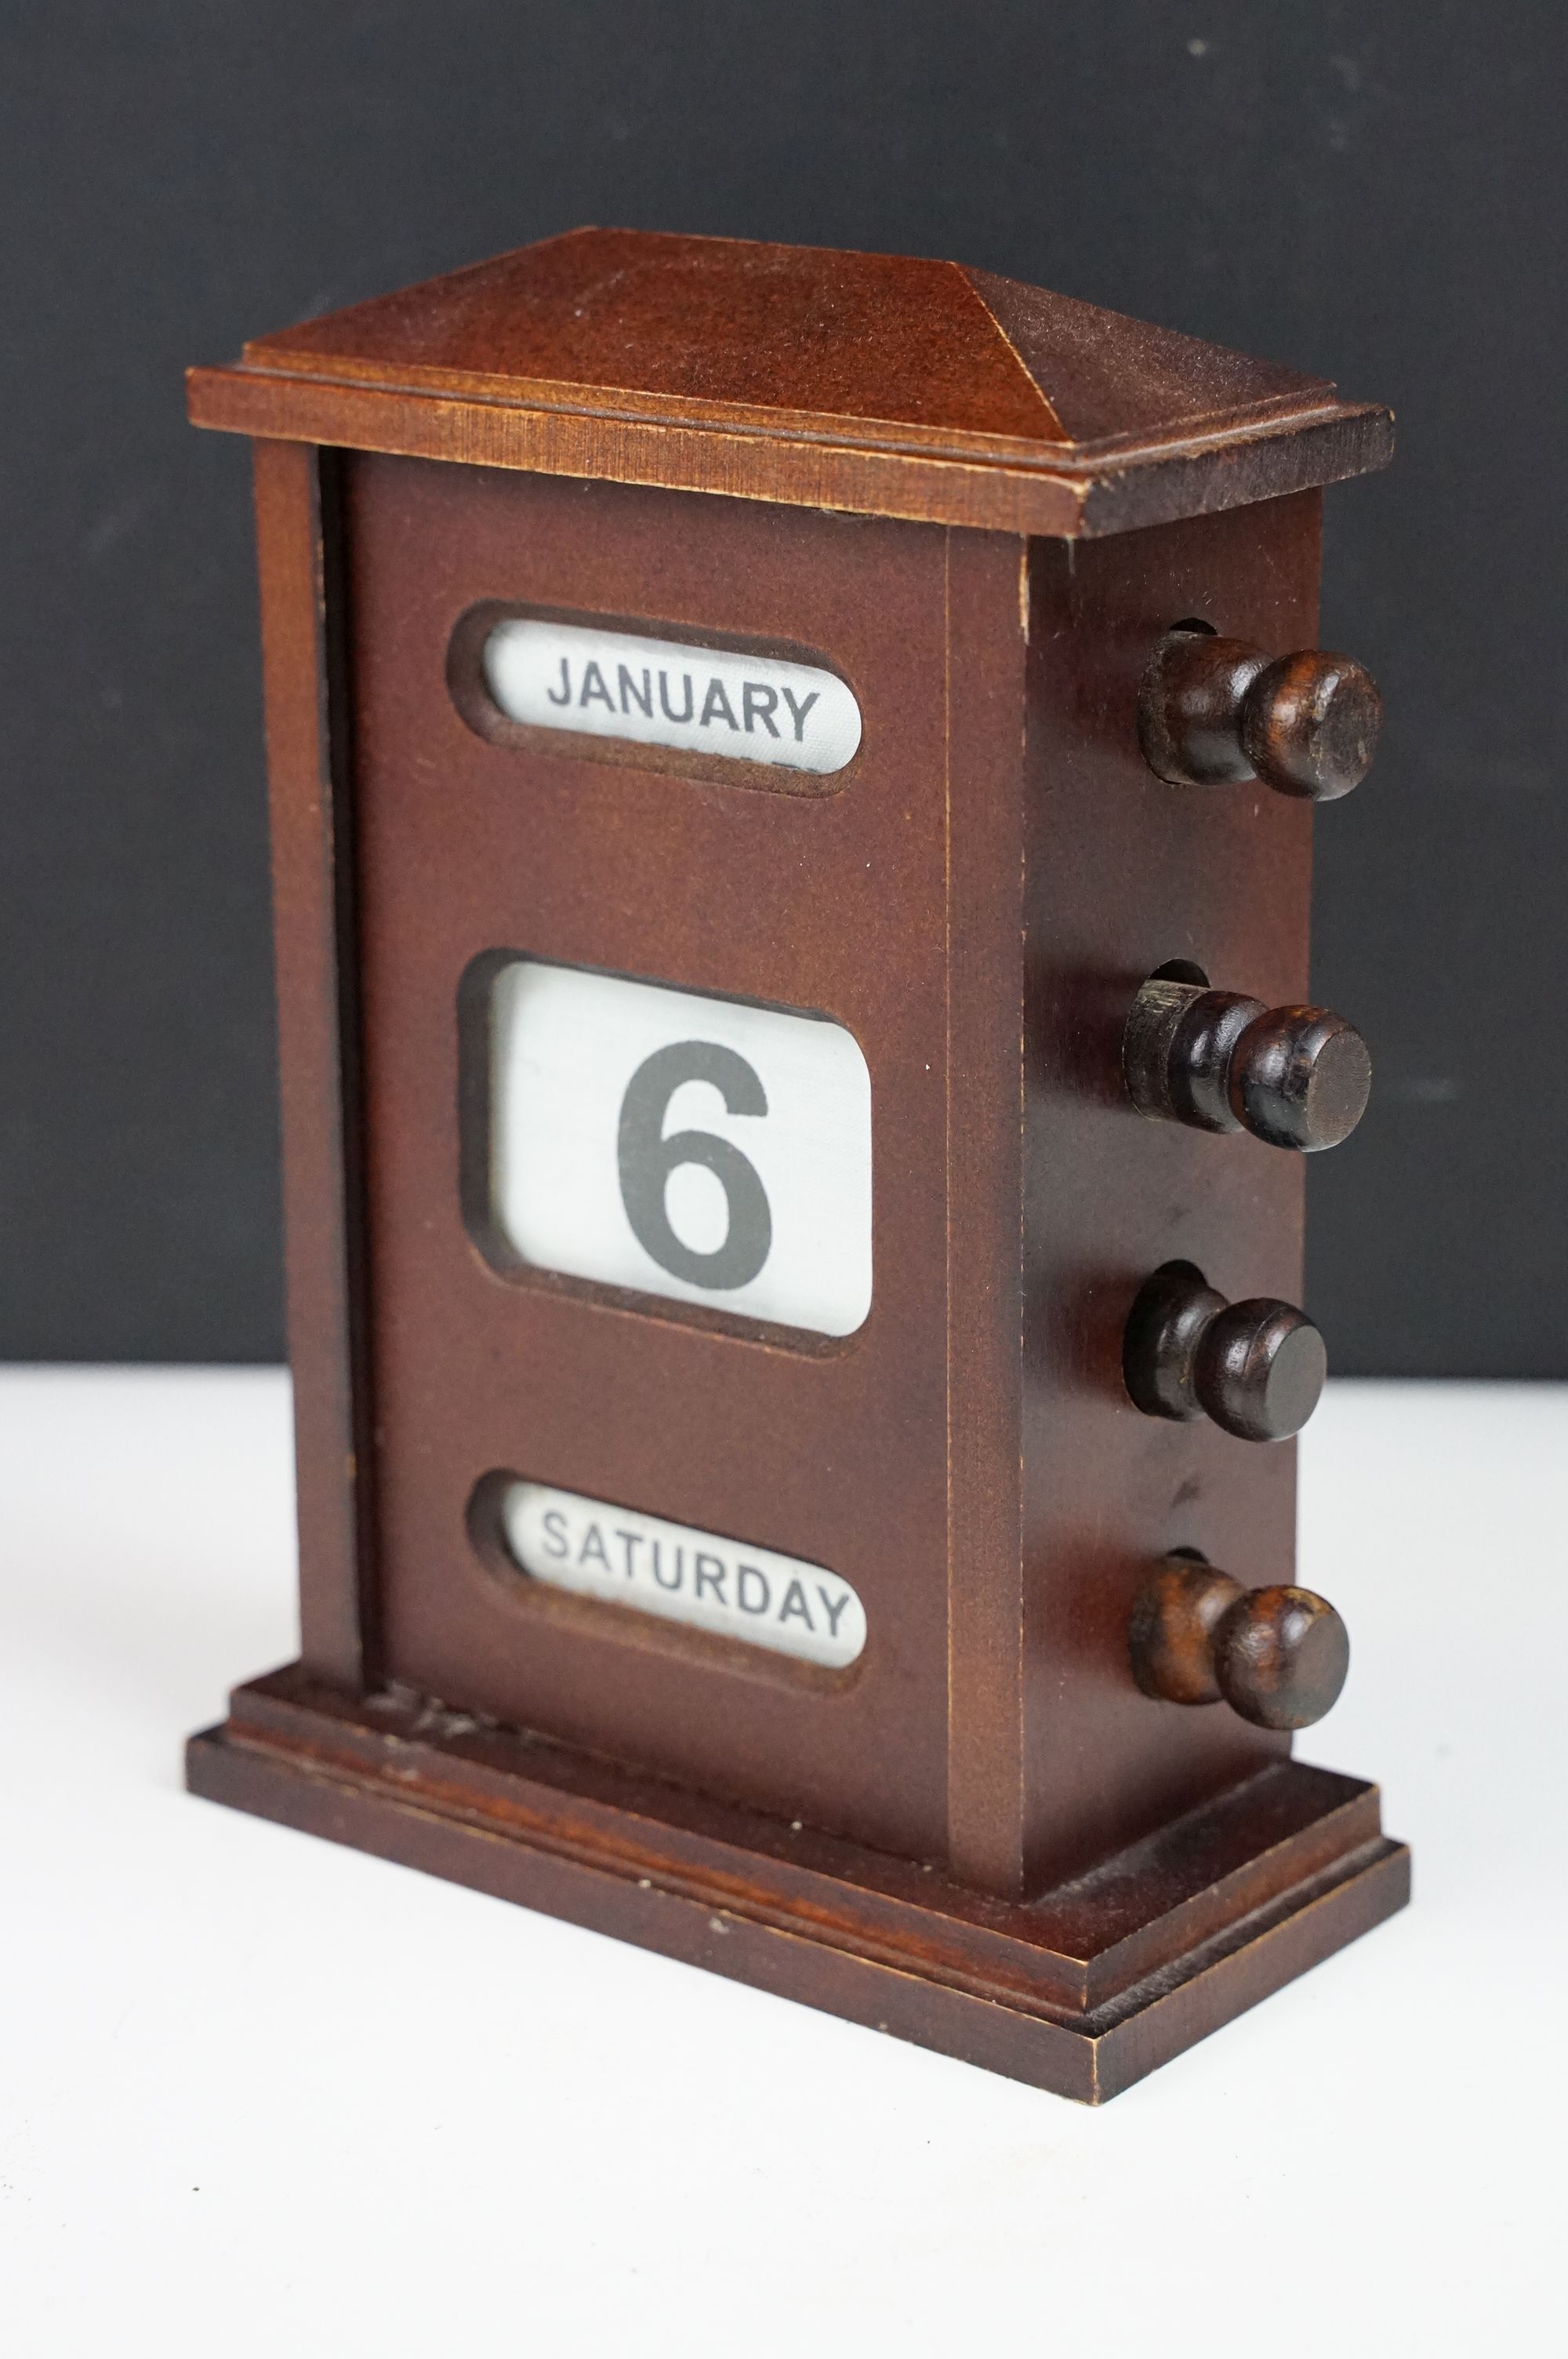 Edwardian style Wooden Cased Perpetual Desk Calendar, 18cm high - Image 3 of 5